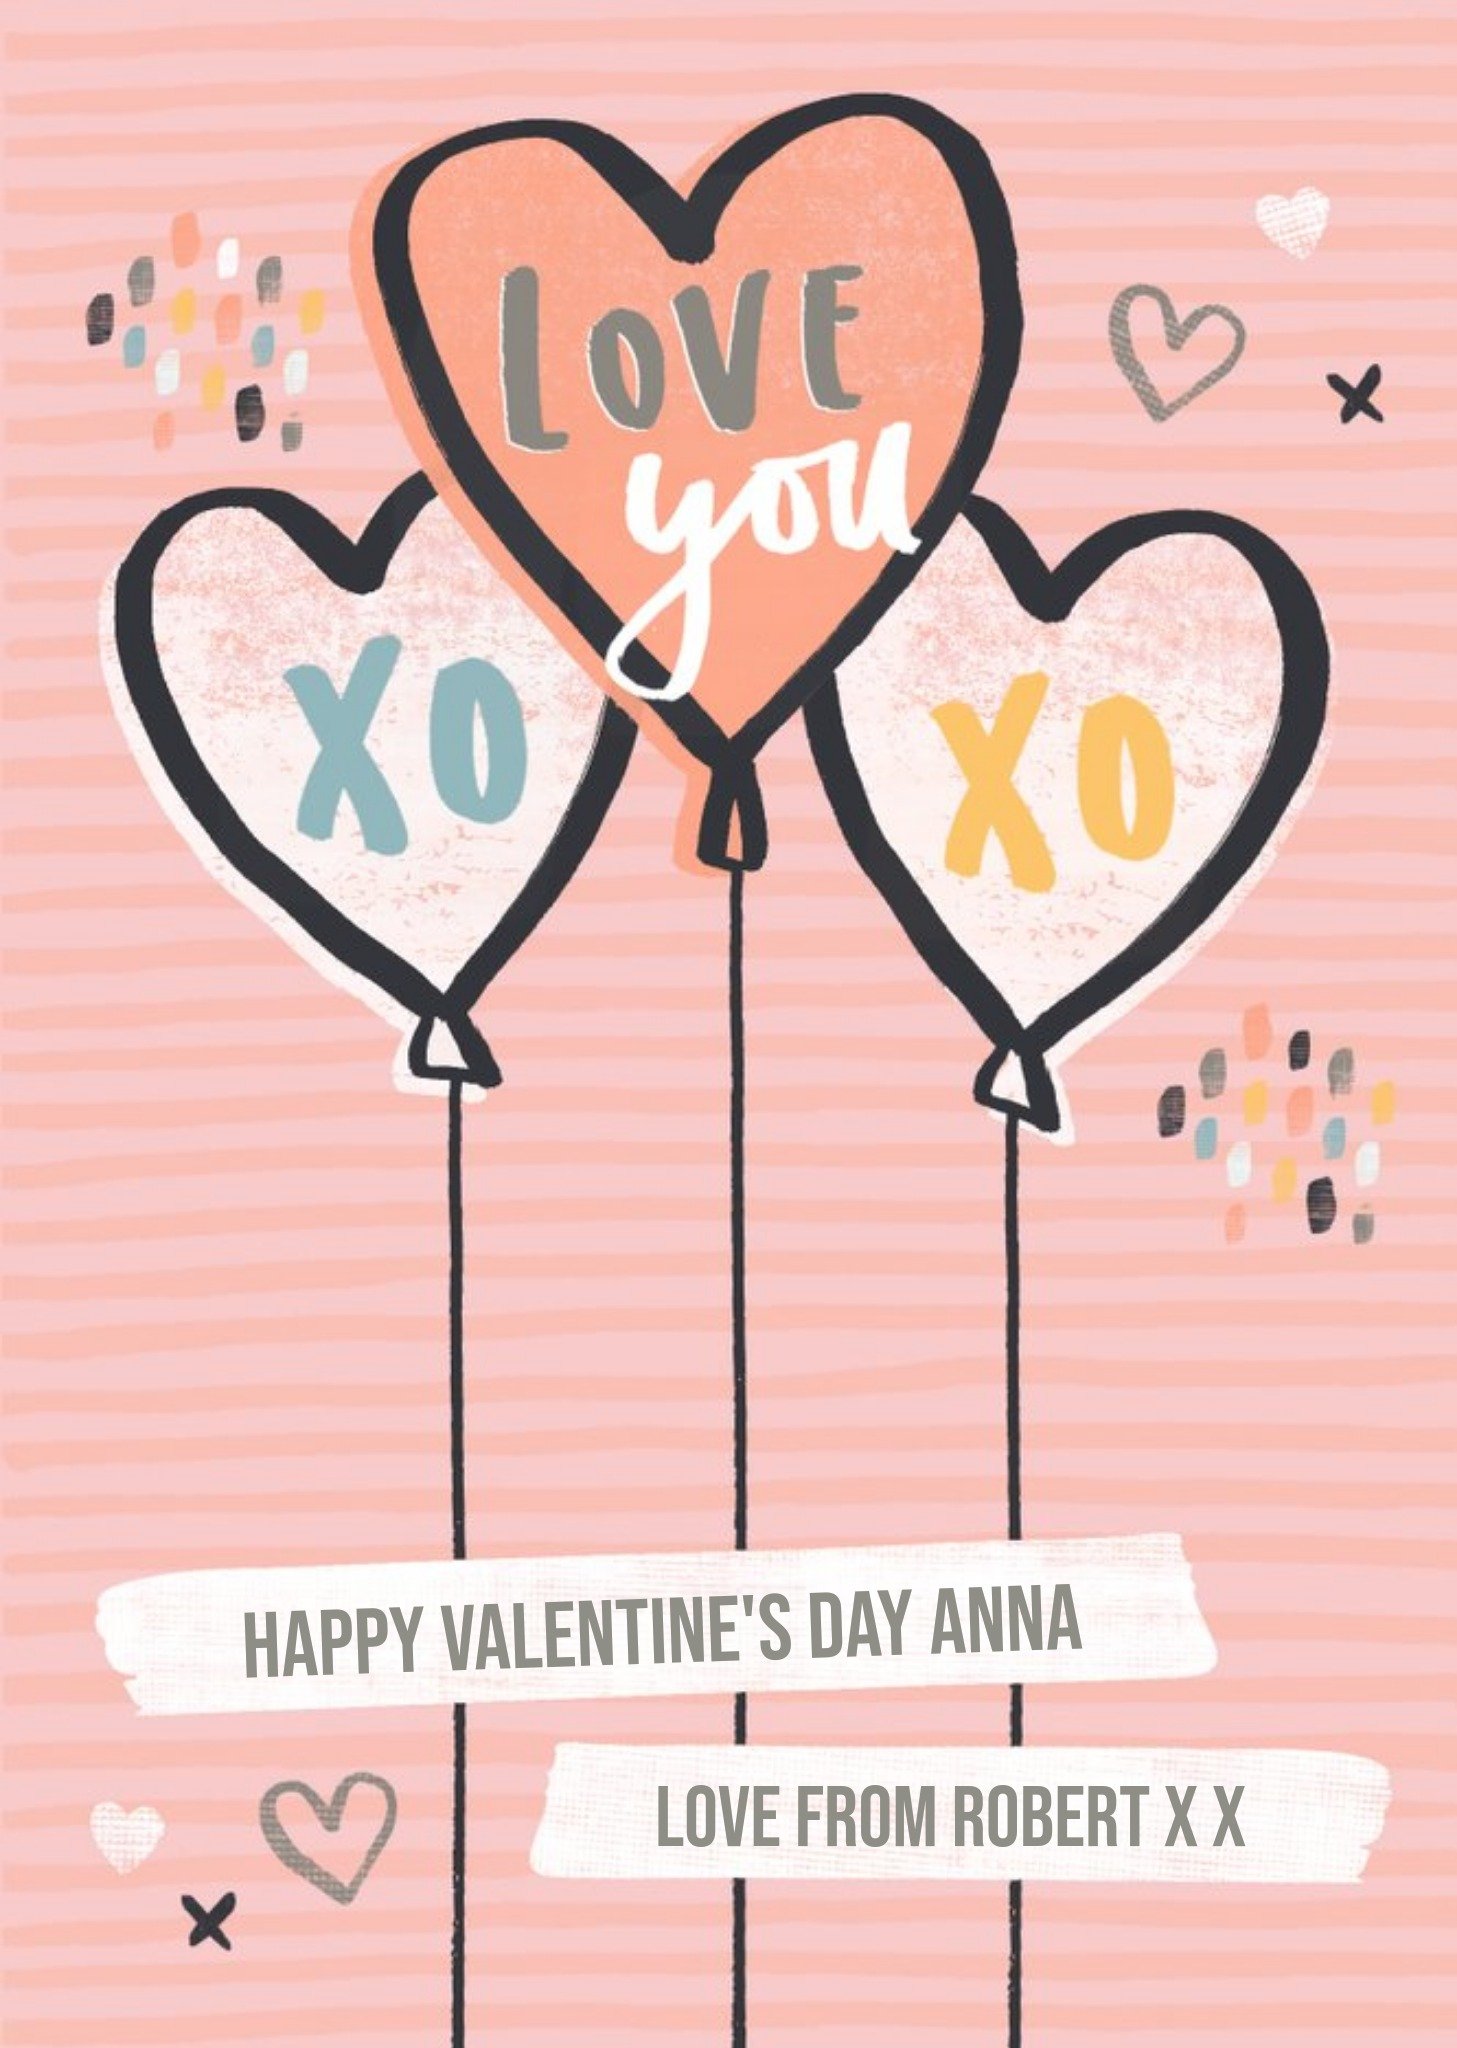 Moonpig Xo Heart Balloons Personalised Happy Valentine's Day Card For Girlfriend Ecard